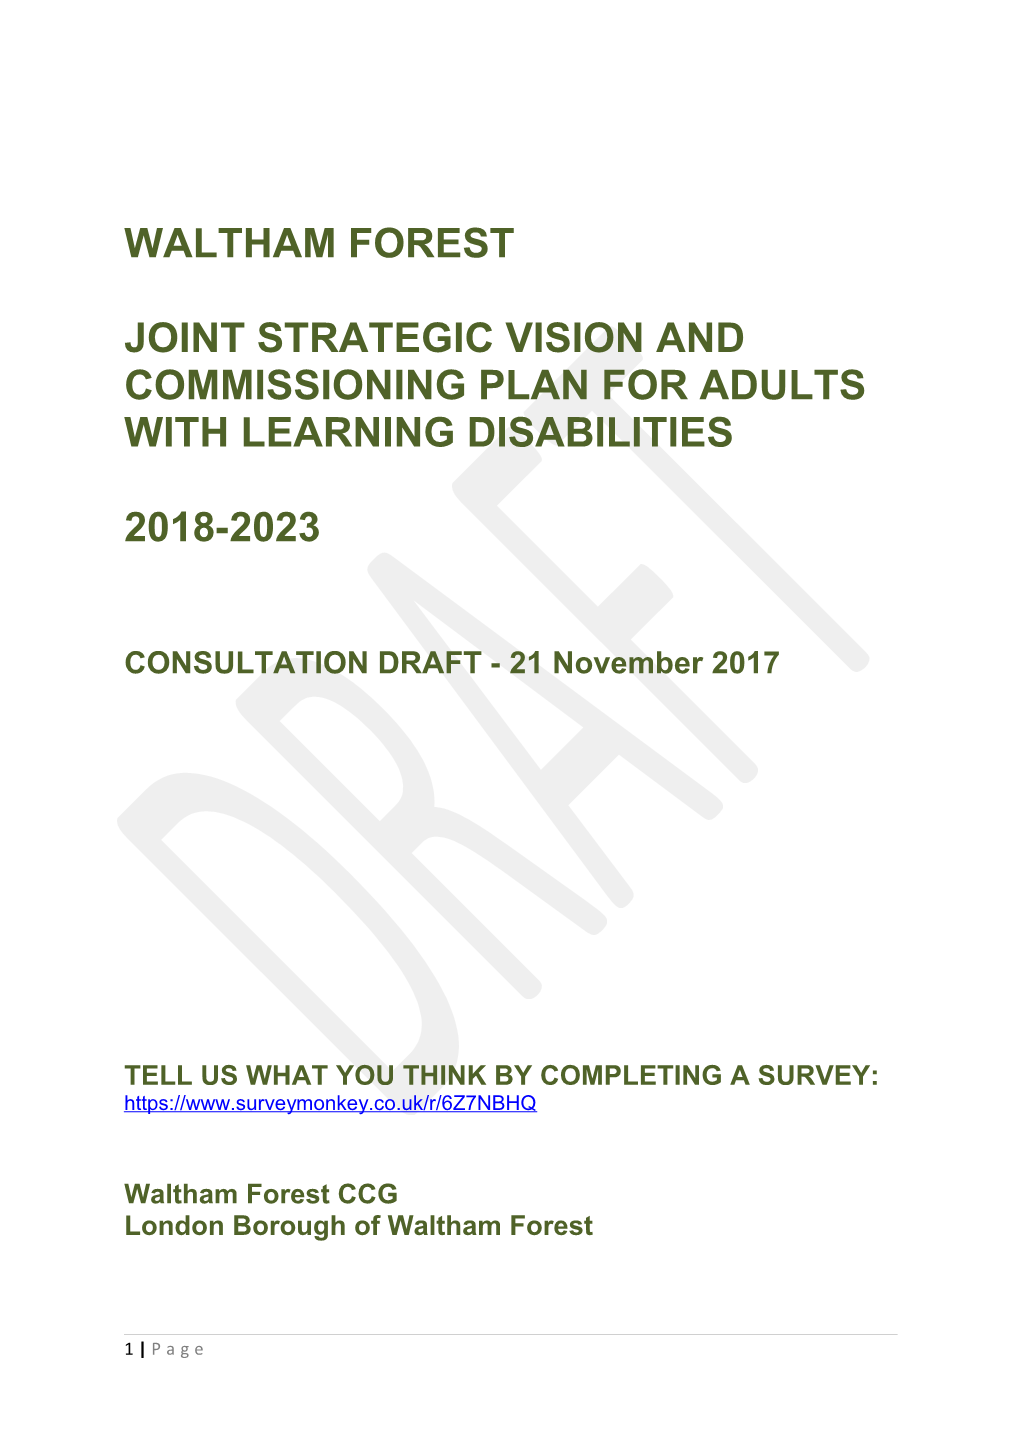 Joint Strategic Vision and Commissioning Plan for Adults with Learning Disabilities